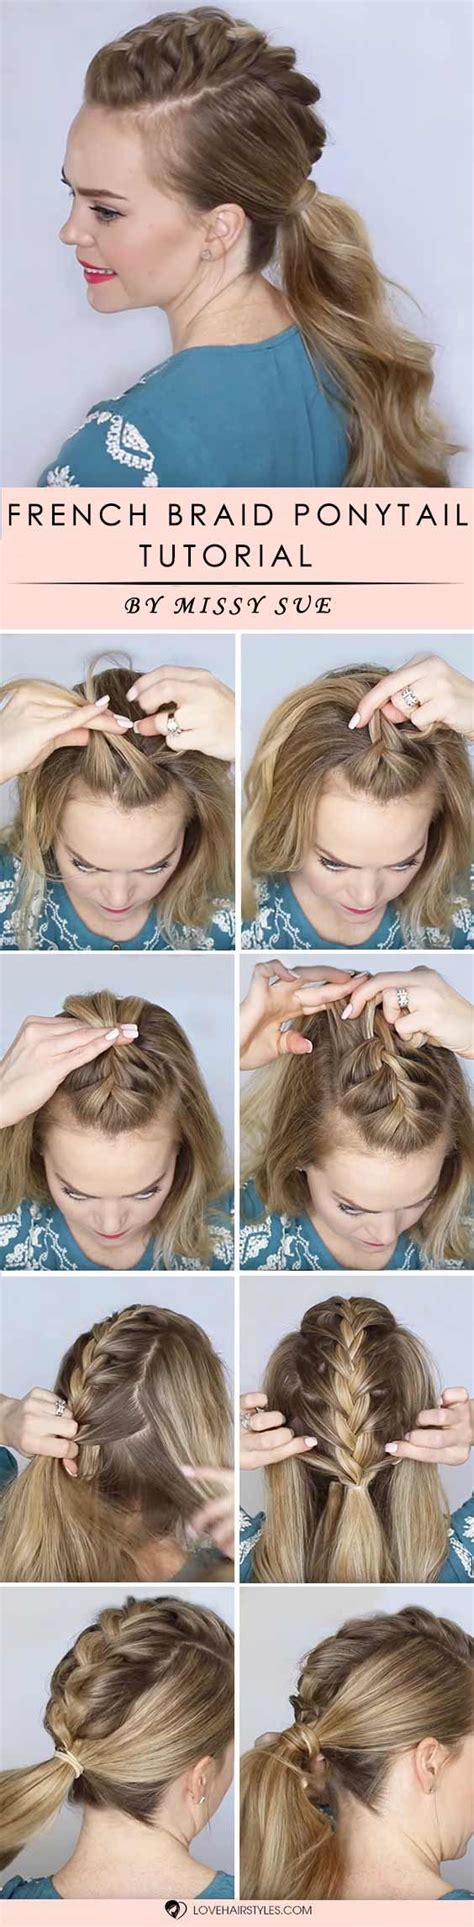 Double half french ladder braids lace braid headband dutch braided baptism hairstyle easy & edgy braided style | teen style viking braids. 26 Simple Tutorials To Braid Your Own Hair Perfectly | LoveHairStyles.com